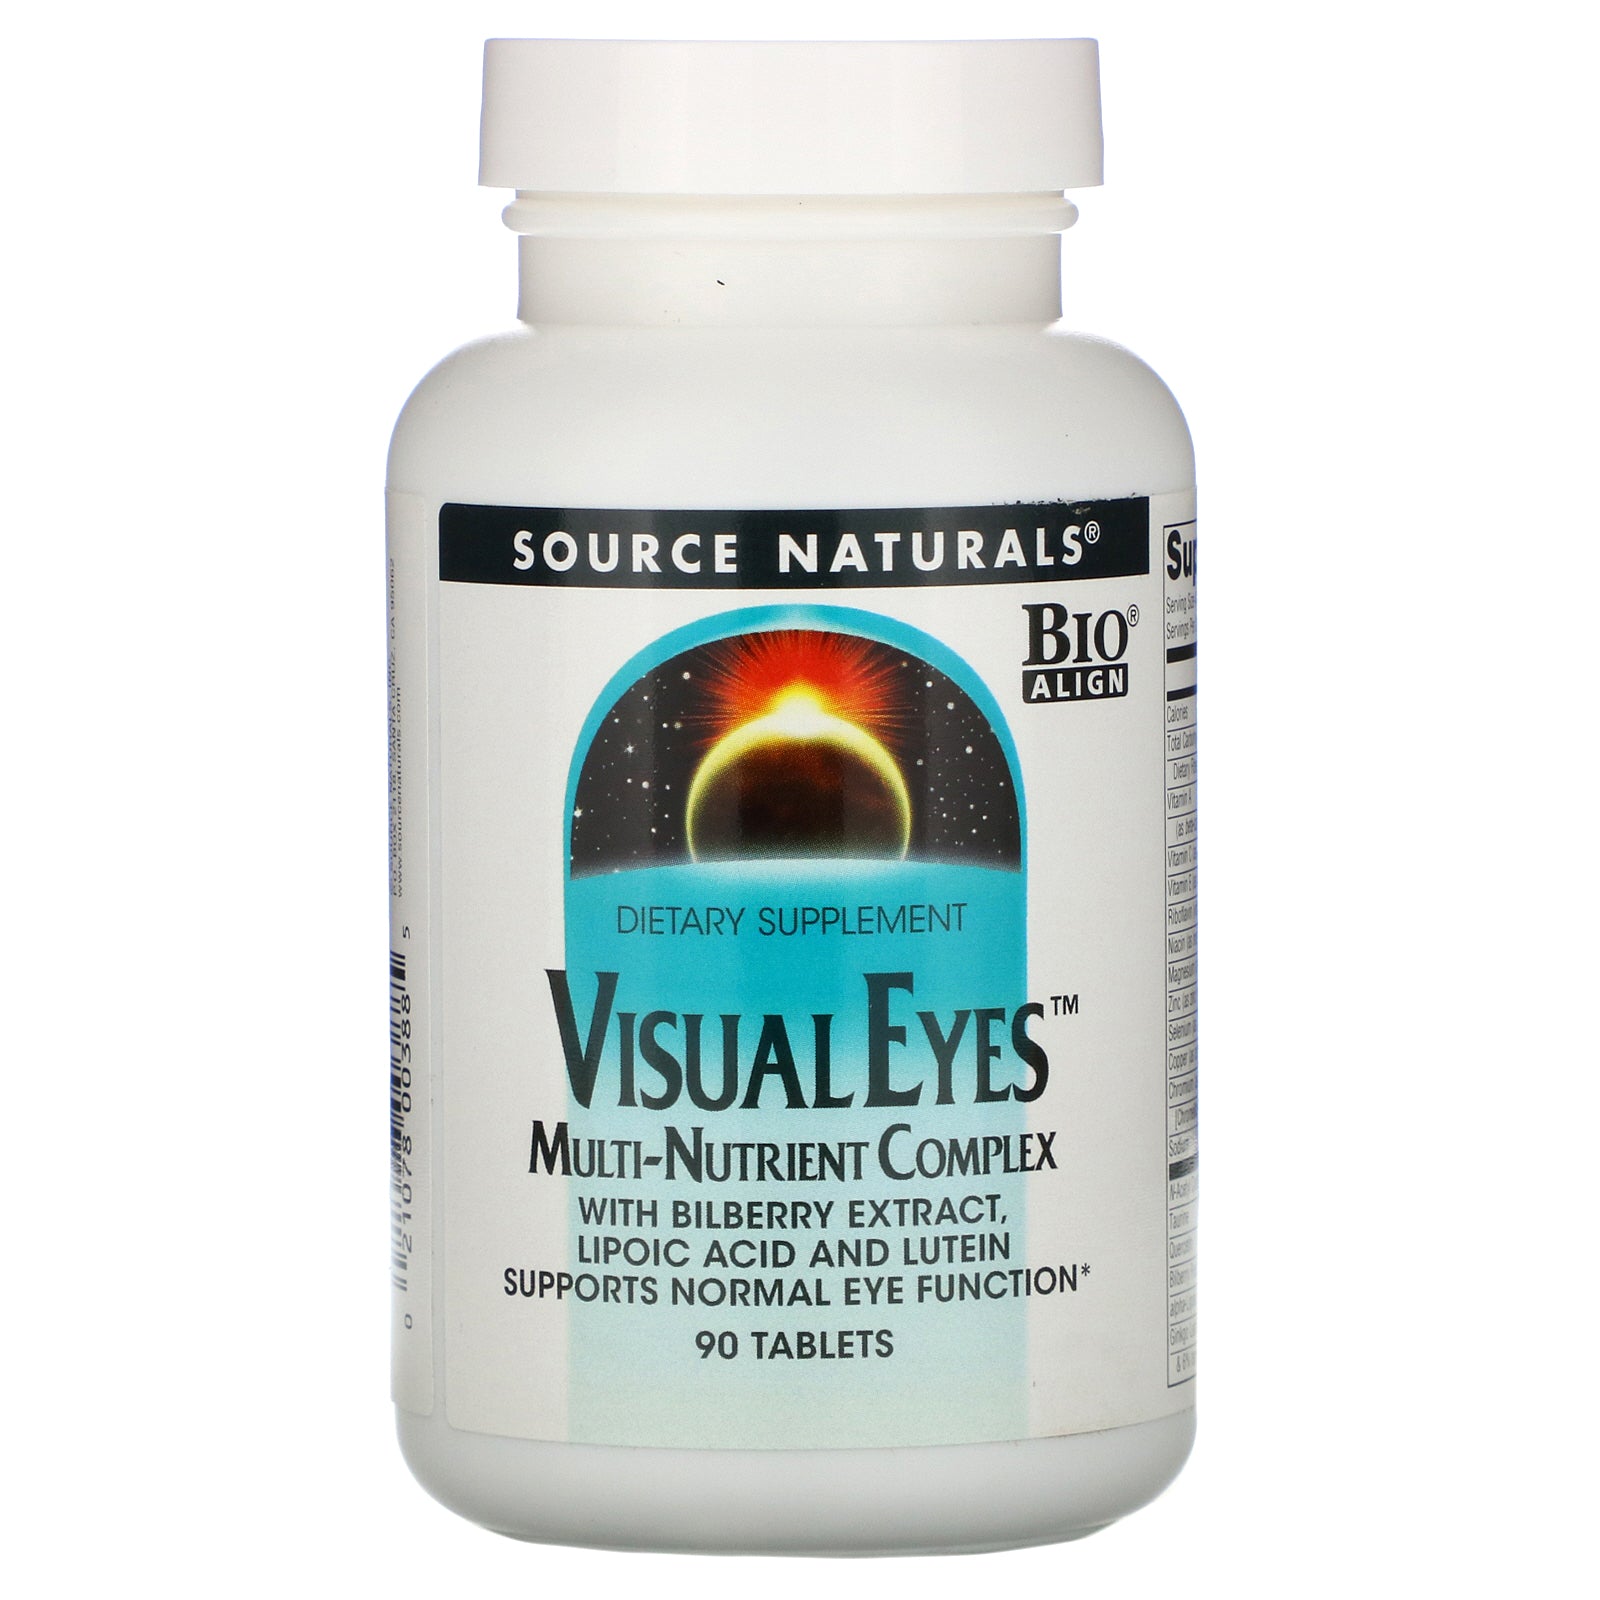 Source Naturals, Visual Eyes, Multi-Nutrient Complex, 90 Tablets